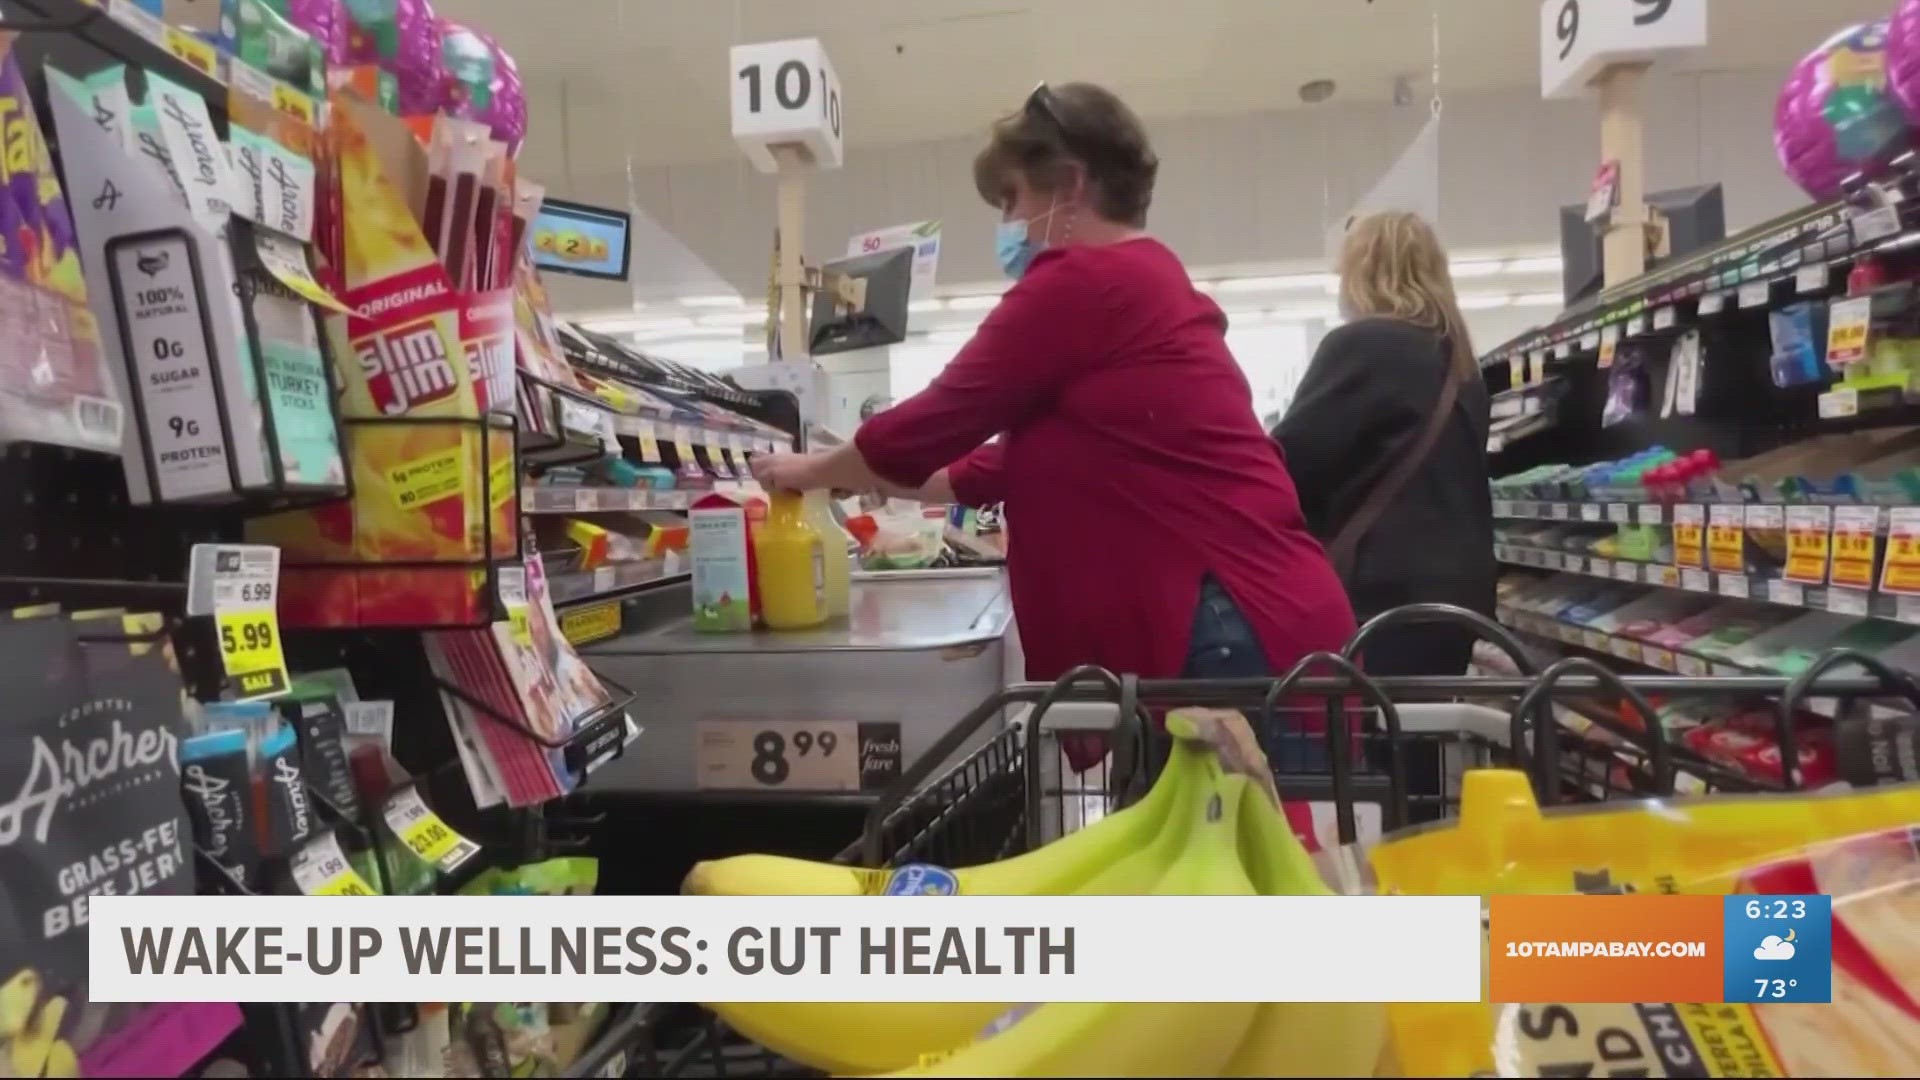 When it comes to your gut health, we spoke to a registered dietitian to get the scoop on products and foods that can help boost your health.